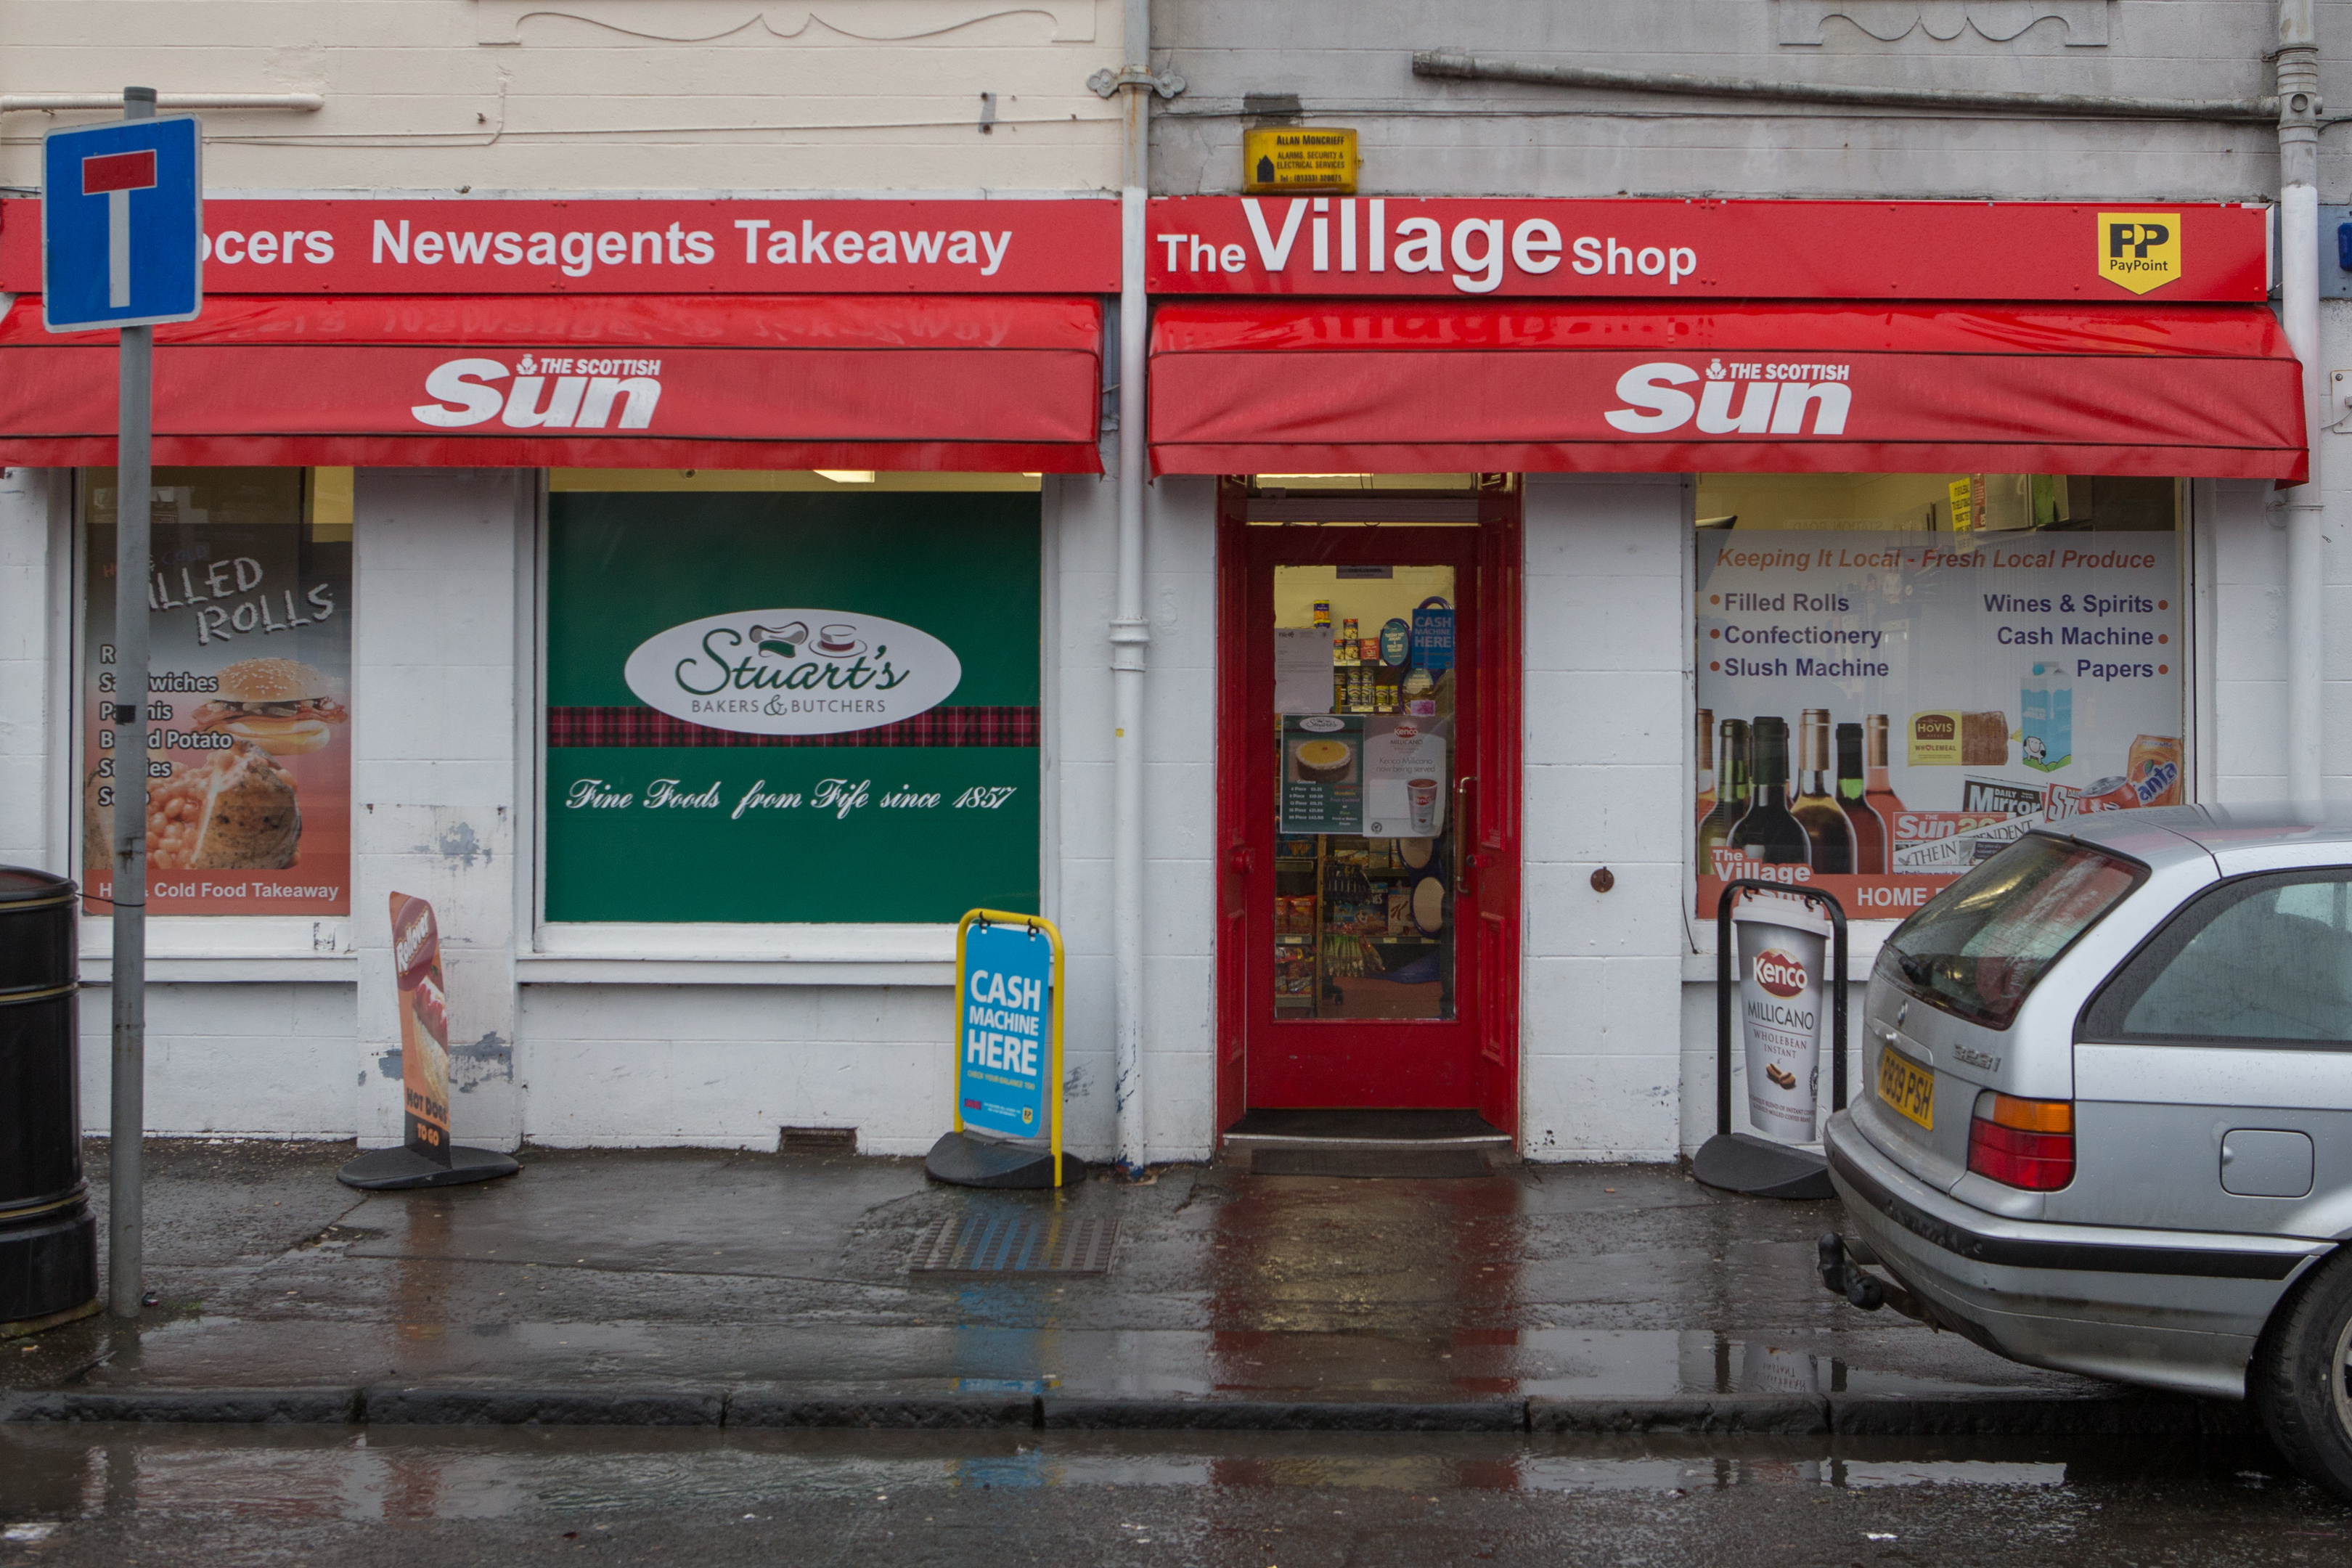 The Village Shop in Station Road.